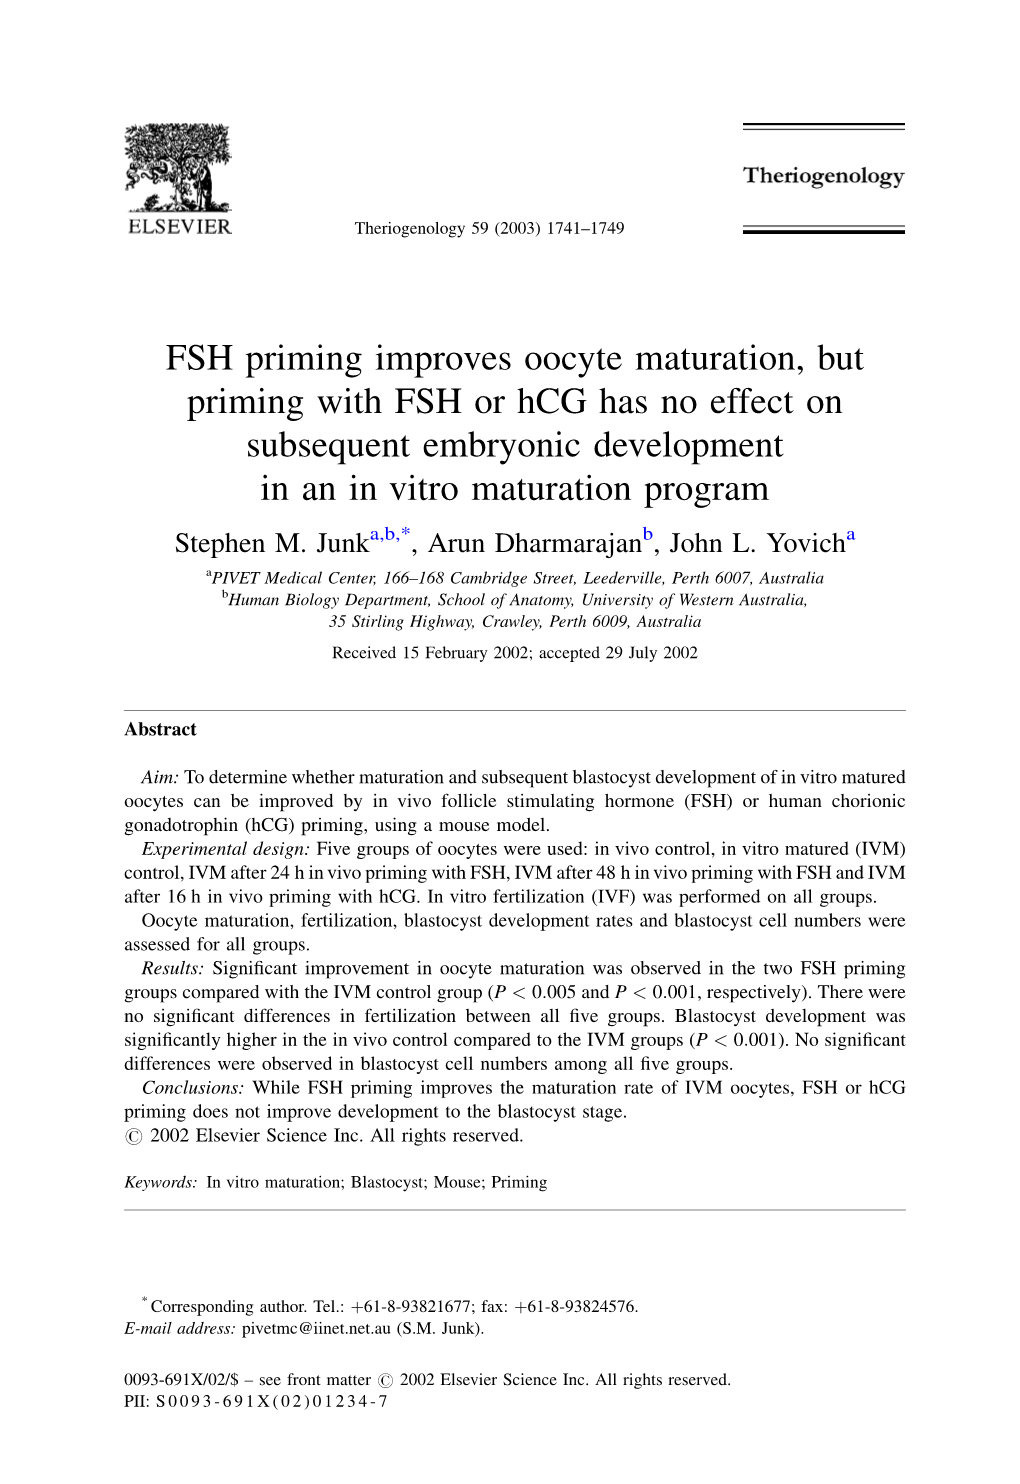 FSH Priming Improves Oocyte Maturation, but Priming with FSH Or Hcg Has No Effect on Subsequent Embryonic Development in an in Vitro Maturation Program Stephen M